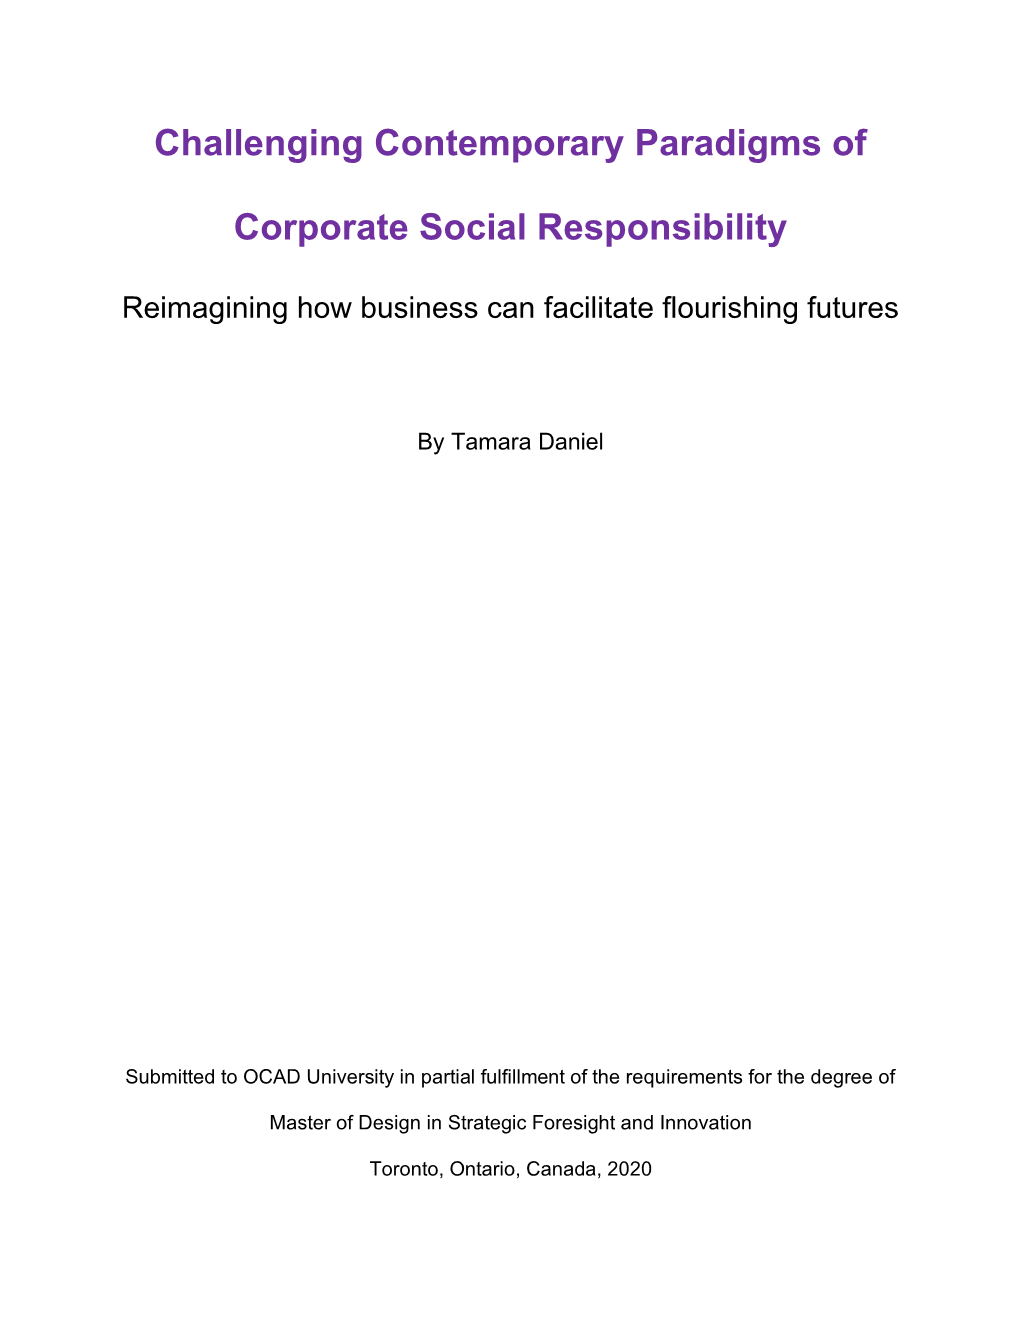 Challenging Contemporary Paradigms of Corporate Social